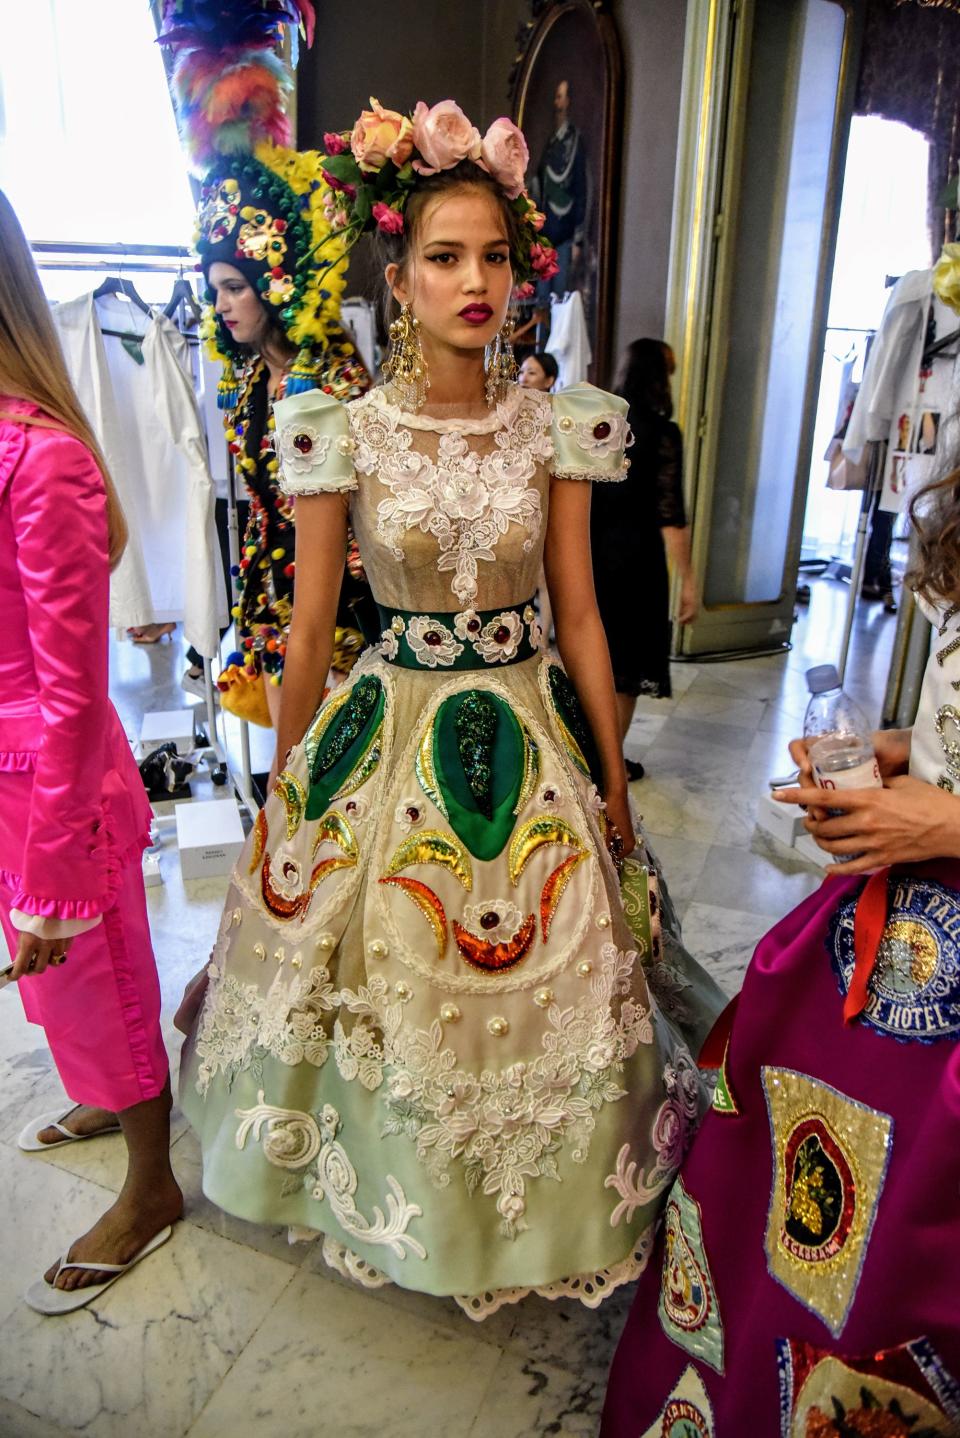 “With its skyline and its energy, New York City is definitely our inspiration,” say Domenico Dolce and Stefano Gabbana of their upcoming Alta Moda show.